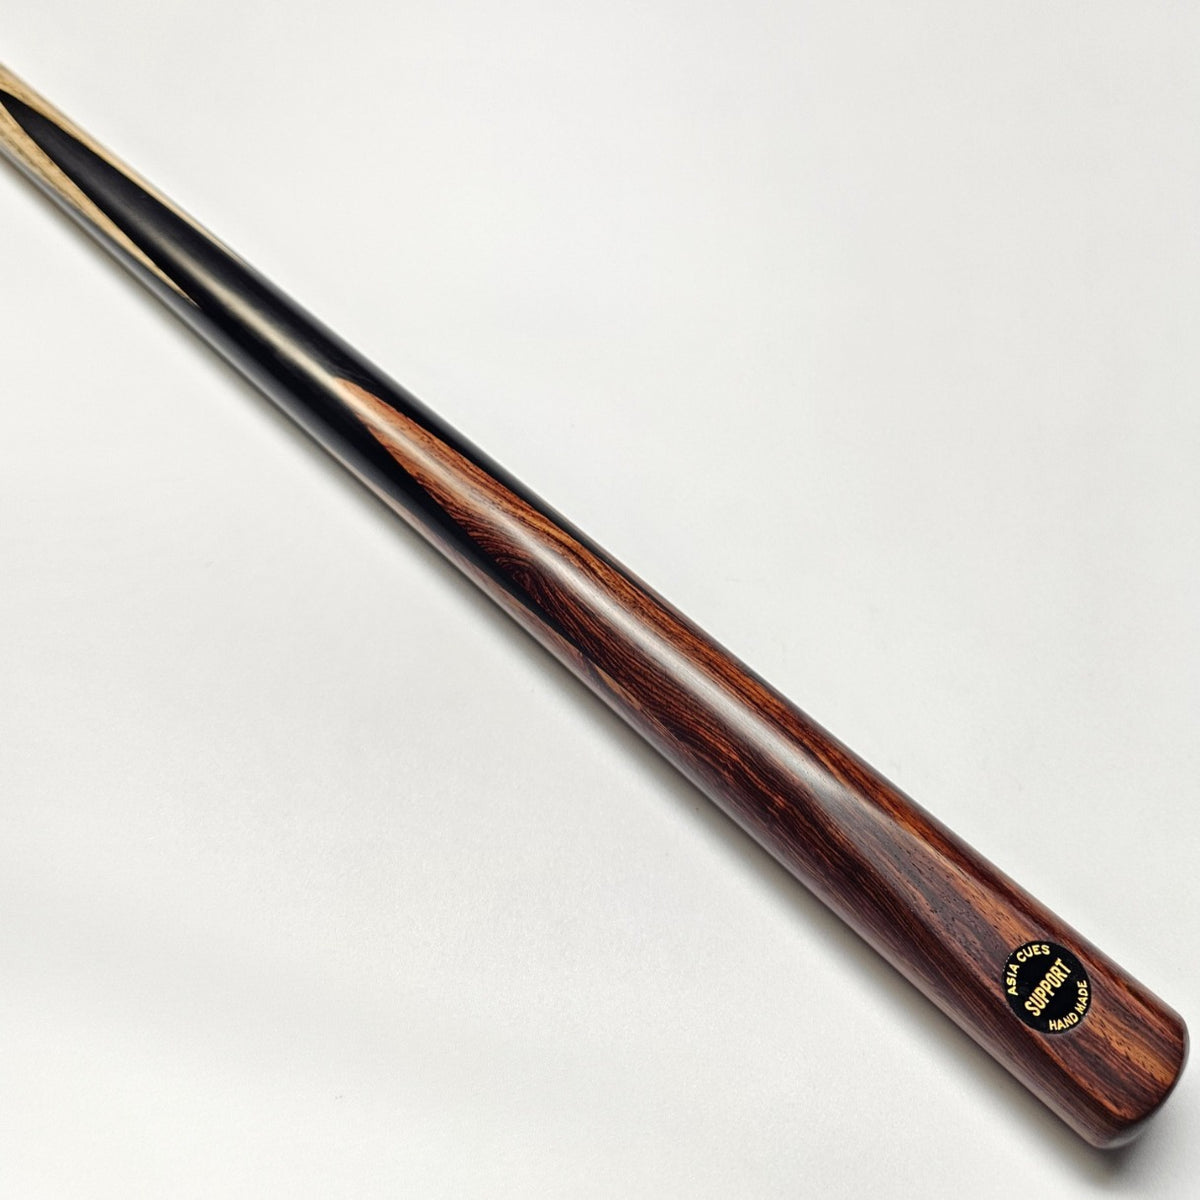 Asia Cues Support - One Piece Pool Cue  Handmade Ebony Butt with 4 lower splices of Exotic Rosewood. Butt View